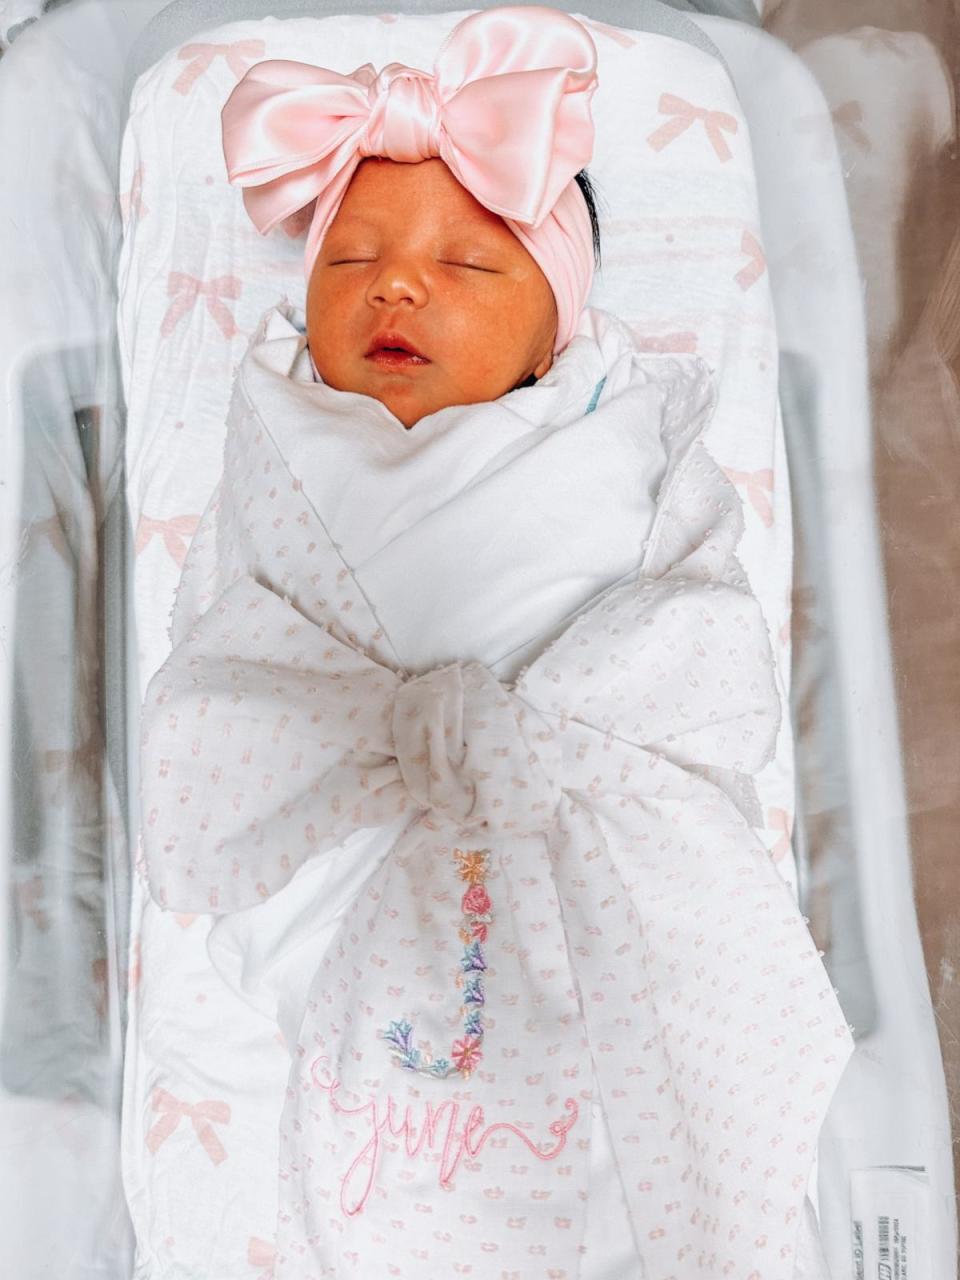 PHOTO: June Carter Clark was born at 2:30 p.m and weighed in at 6 pounds, 12 ounces. (Courtesy Sophie Clark)